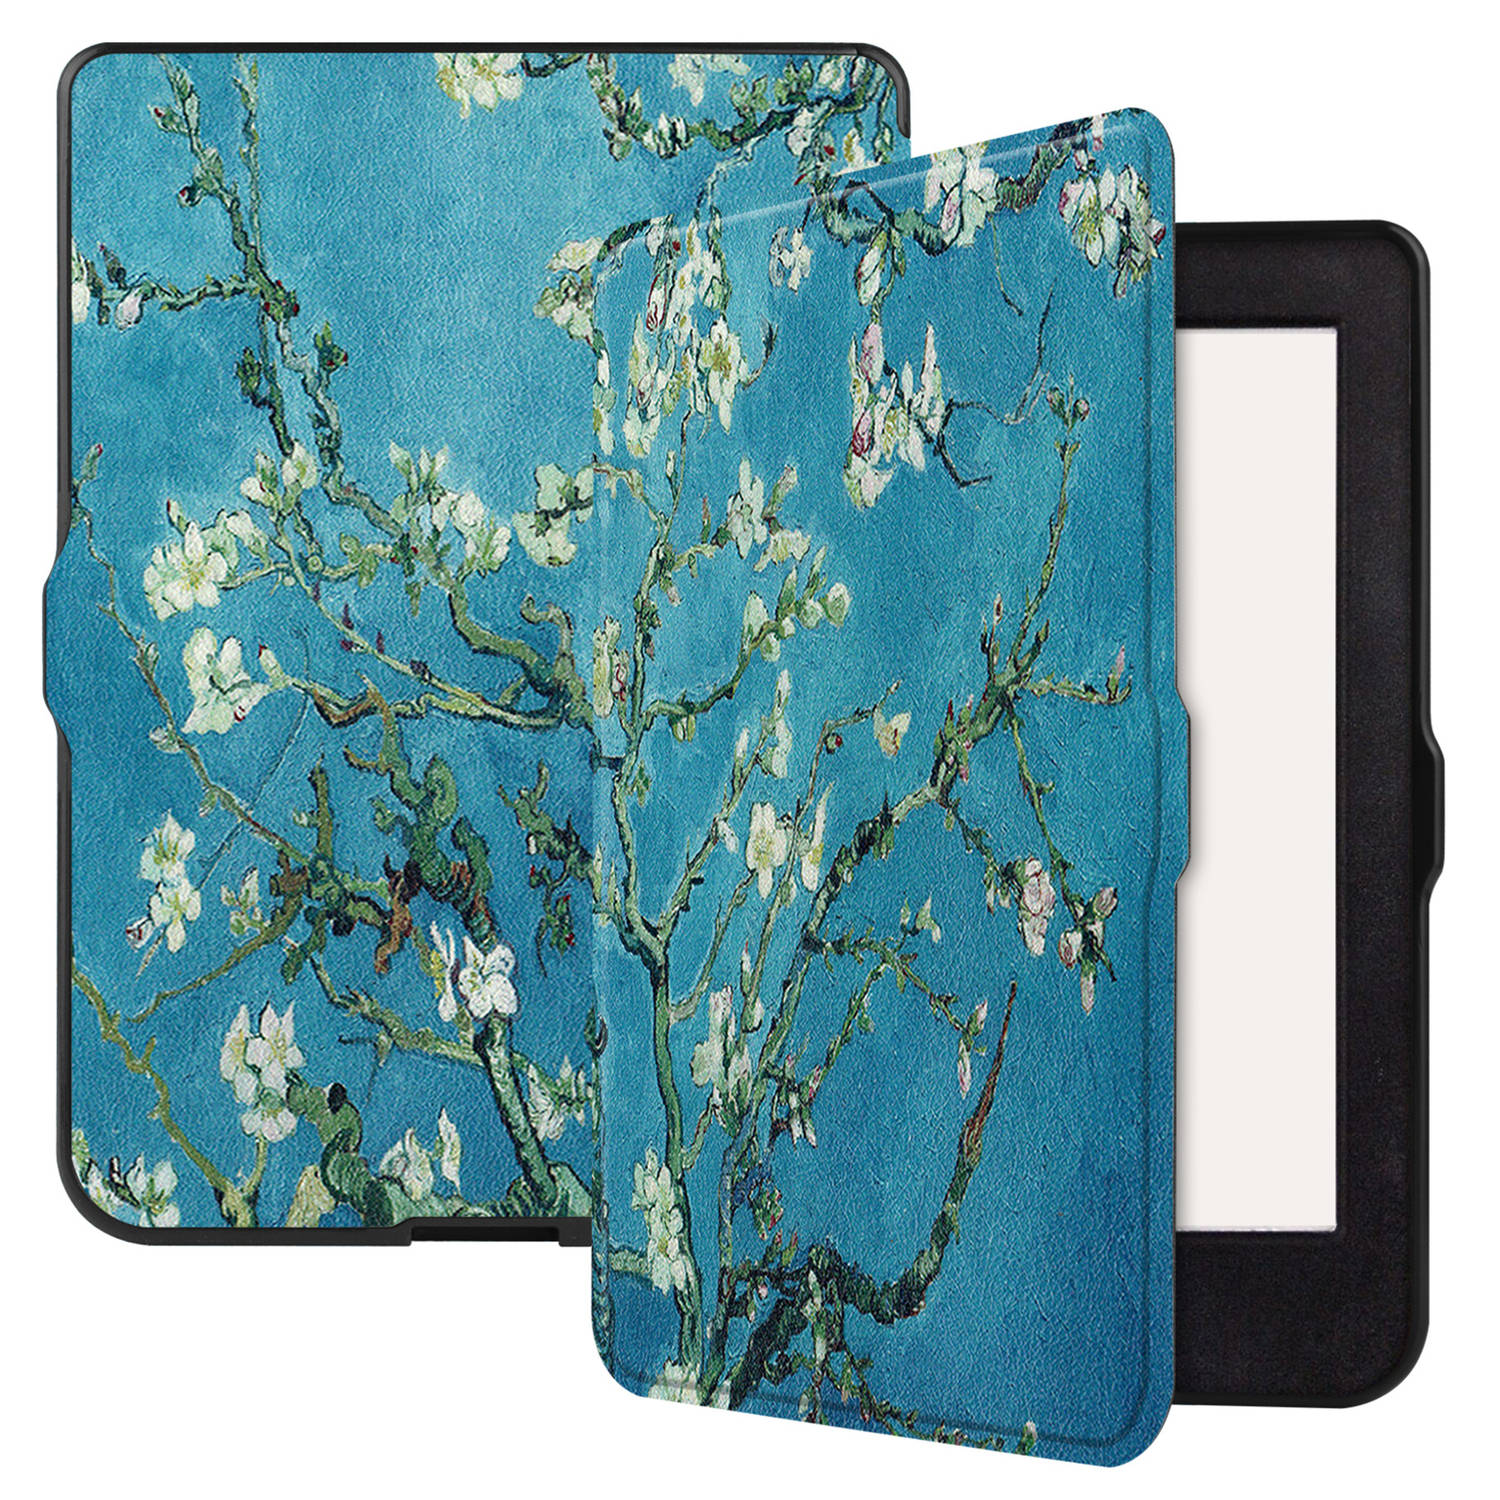 Basey Kobo Nia Hoesje Bookcase Cover Hoes - Kobo Nia Case Cover Hoes - Bloesem